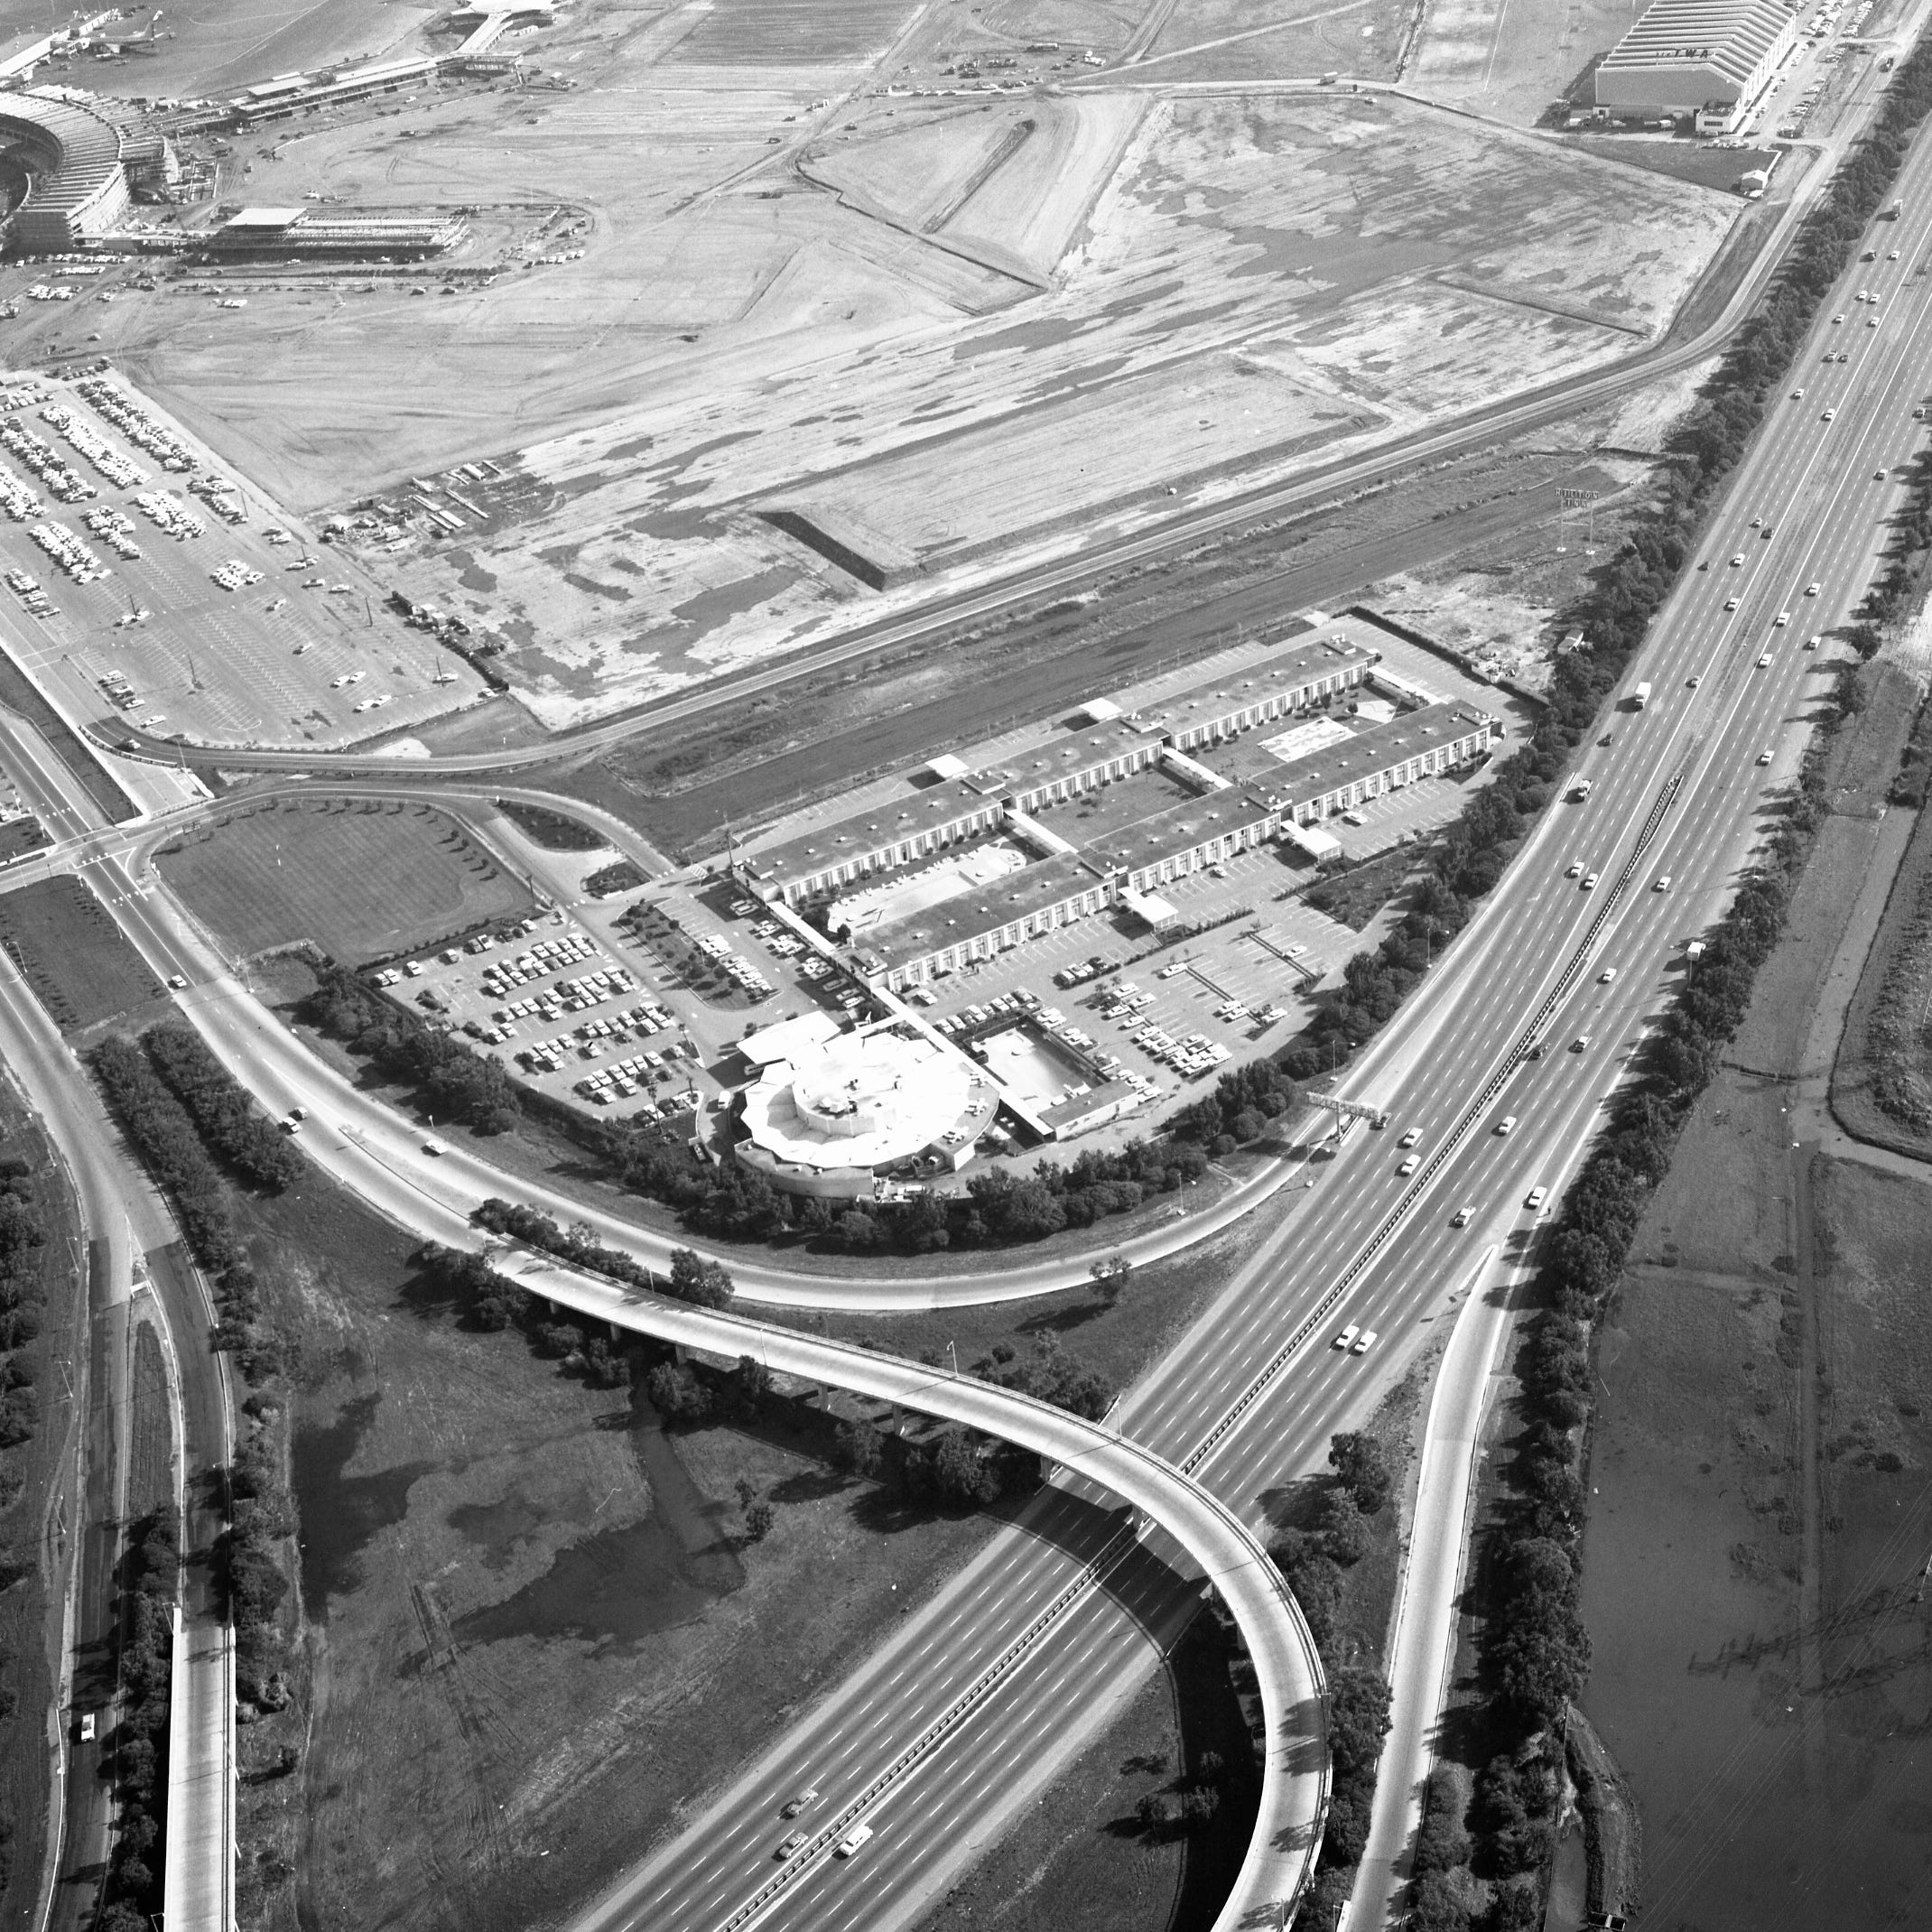 The sprawling San Francisco Airport Hilton opened in 1959.